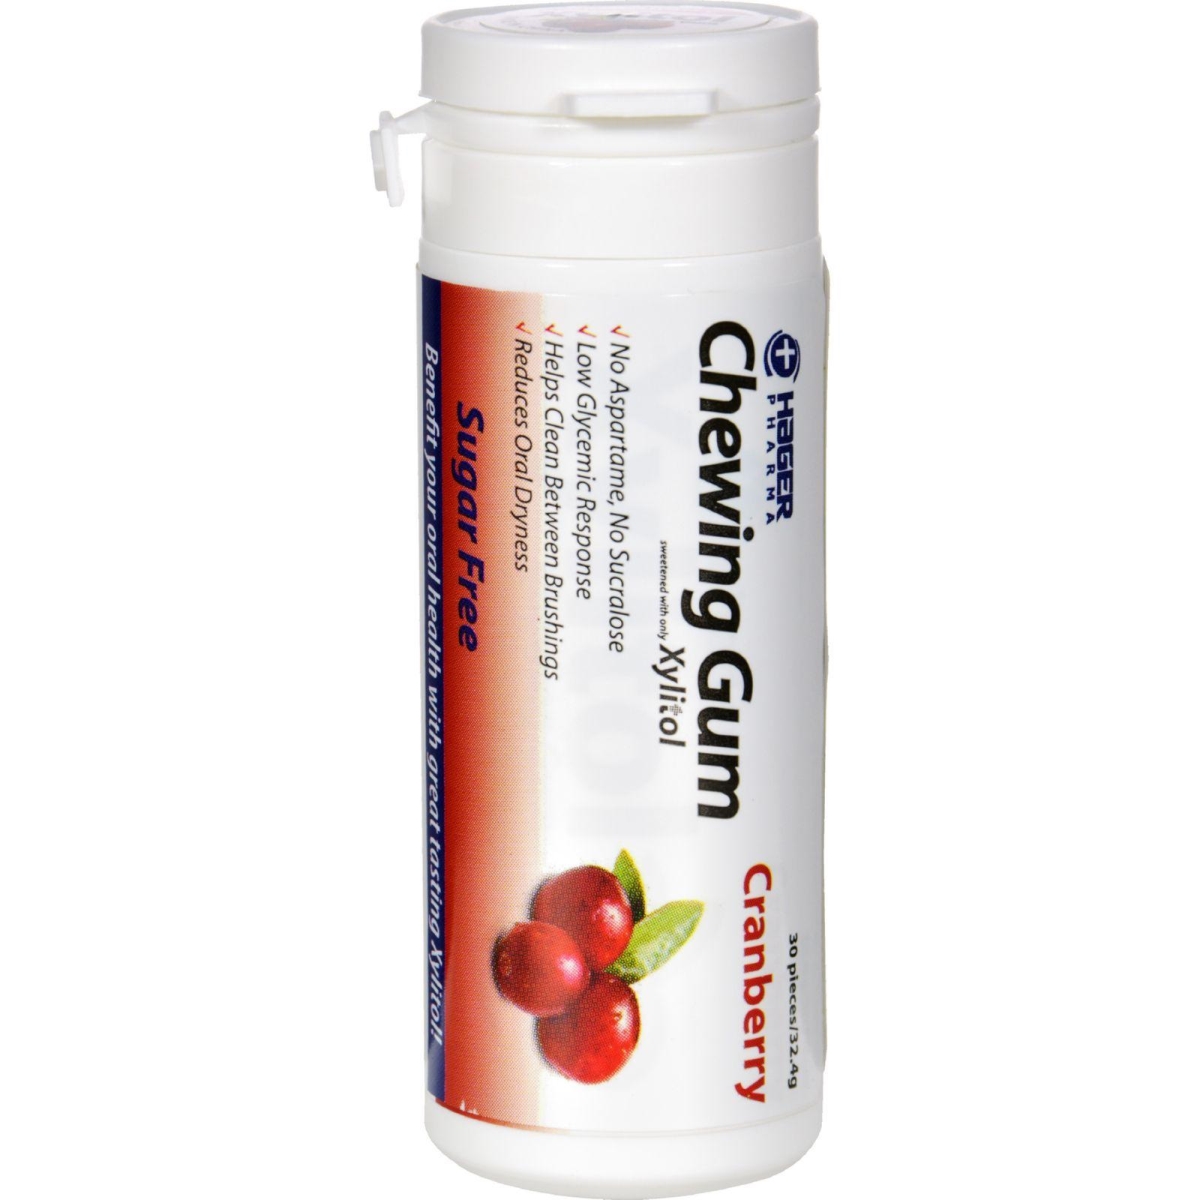 Hg1523760 Cranberry Xylitol Chewing Gum - 30 Count, Case Of 6